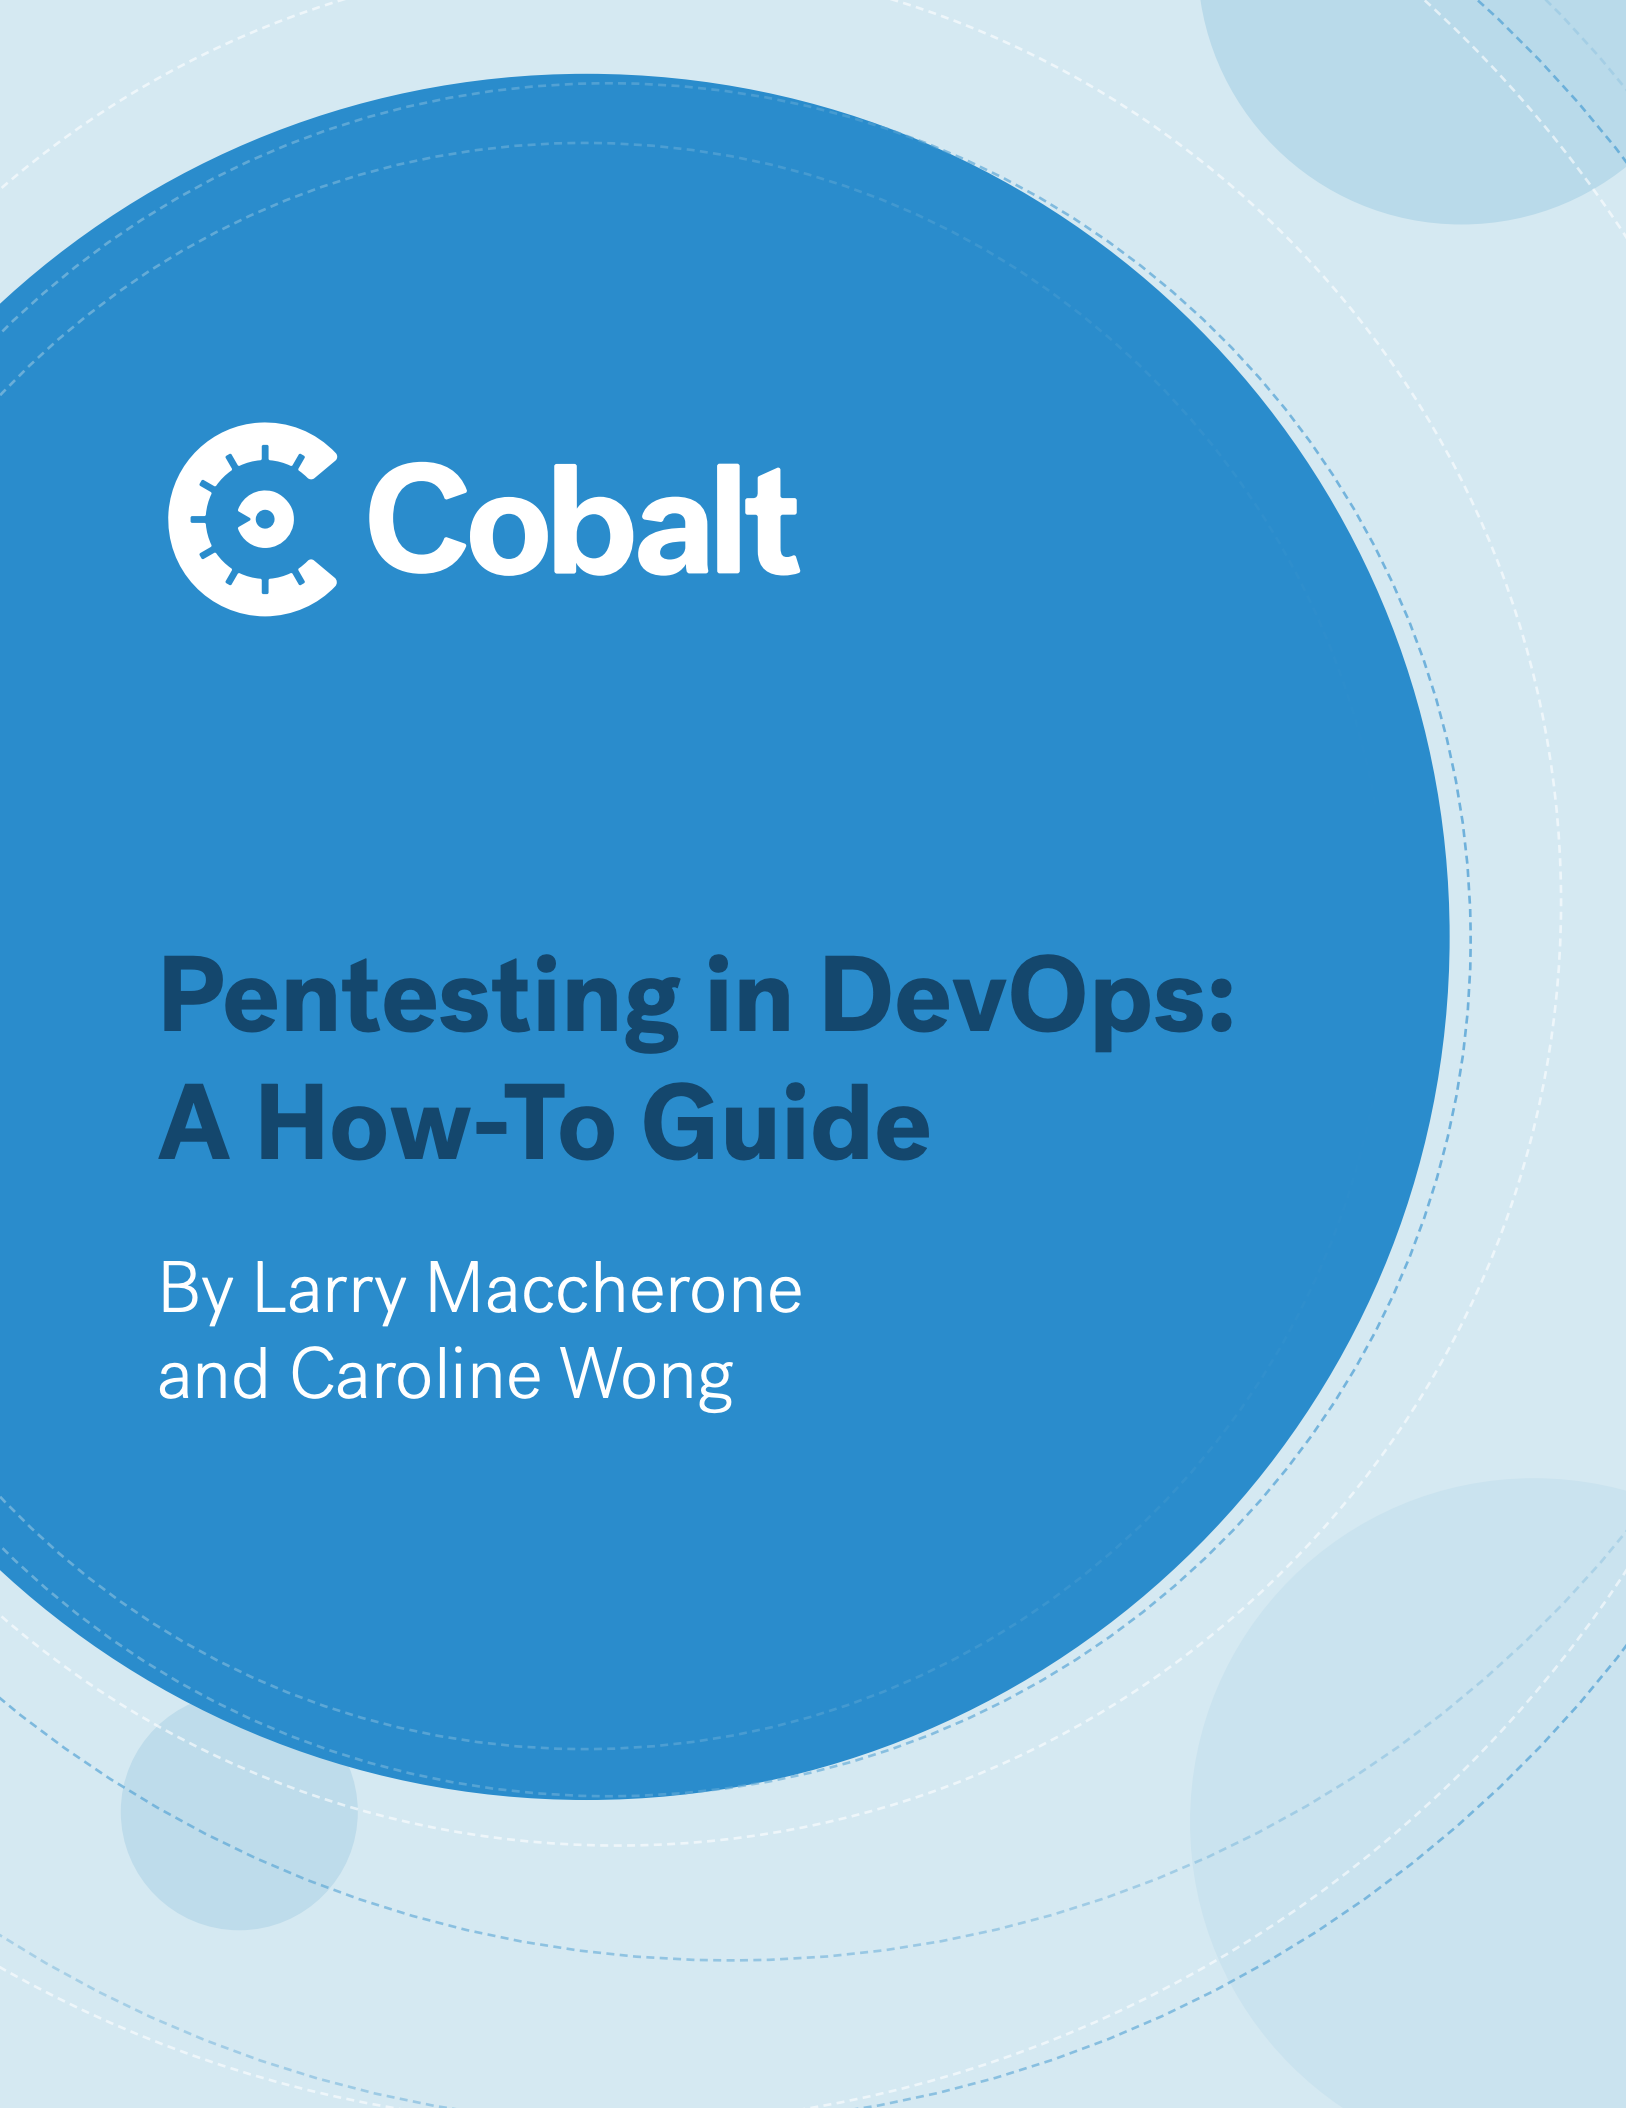 Pentesting in DevOps: A How-To Guide